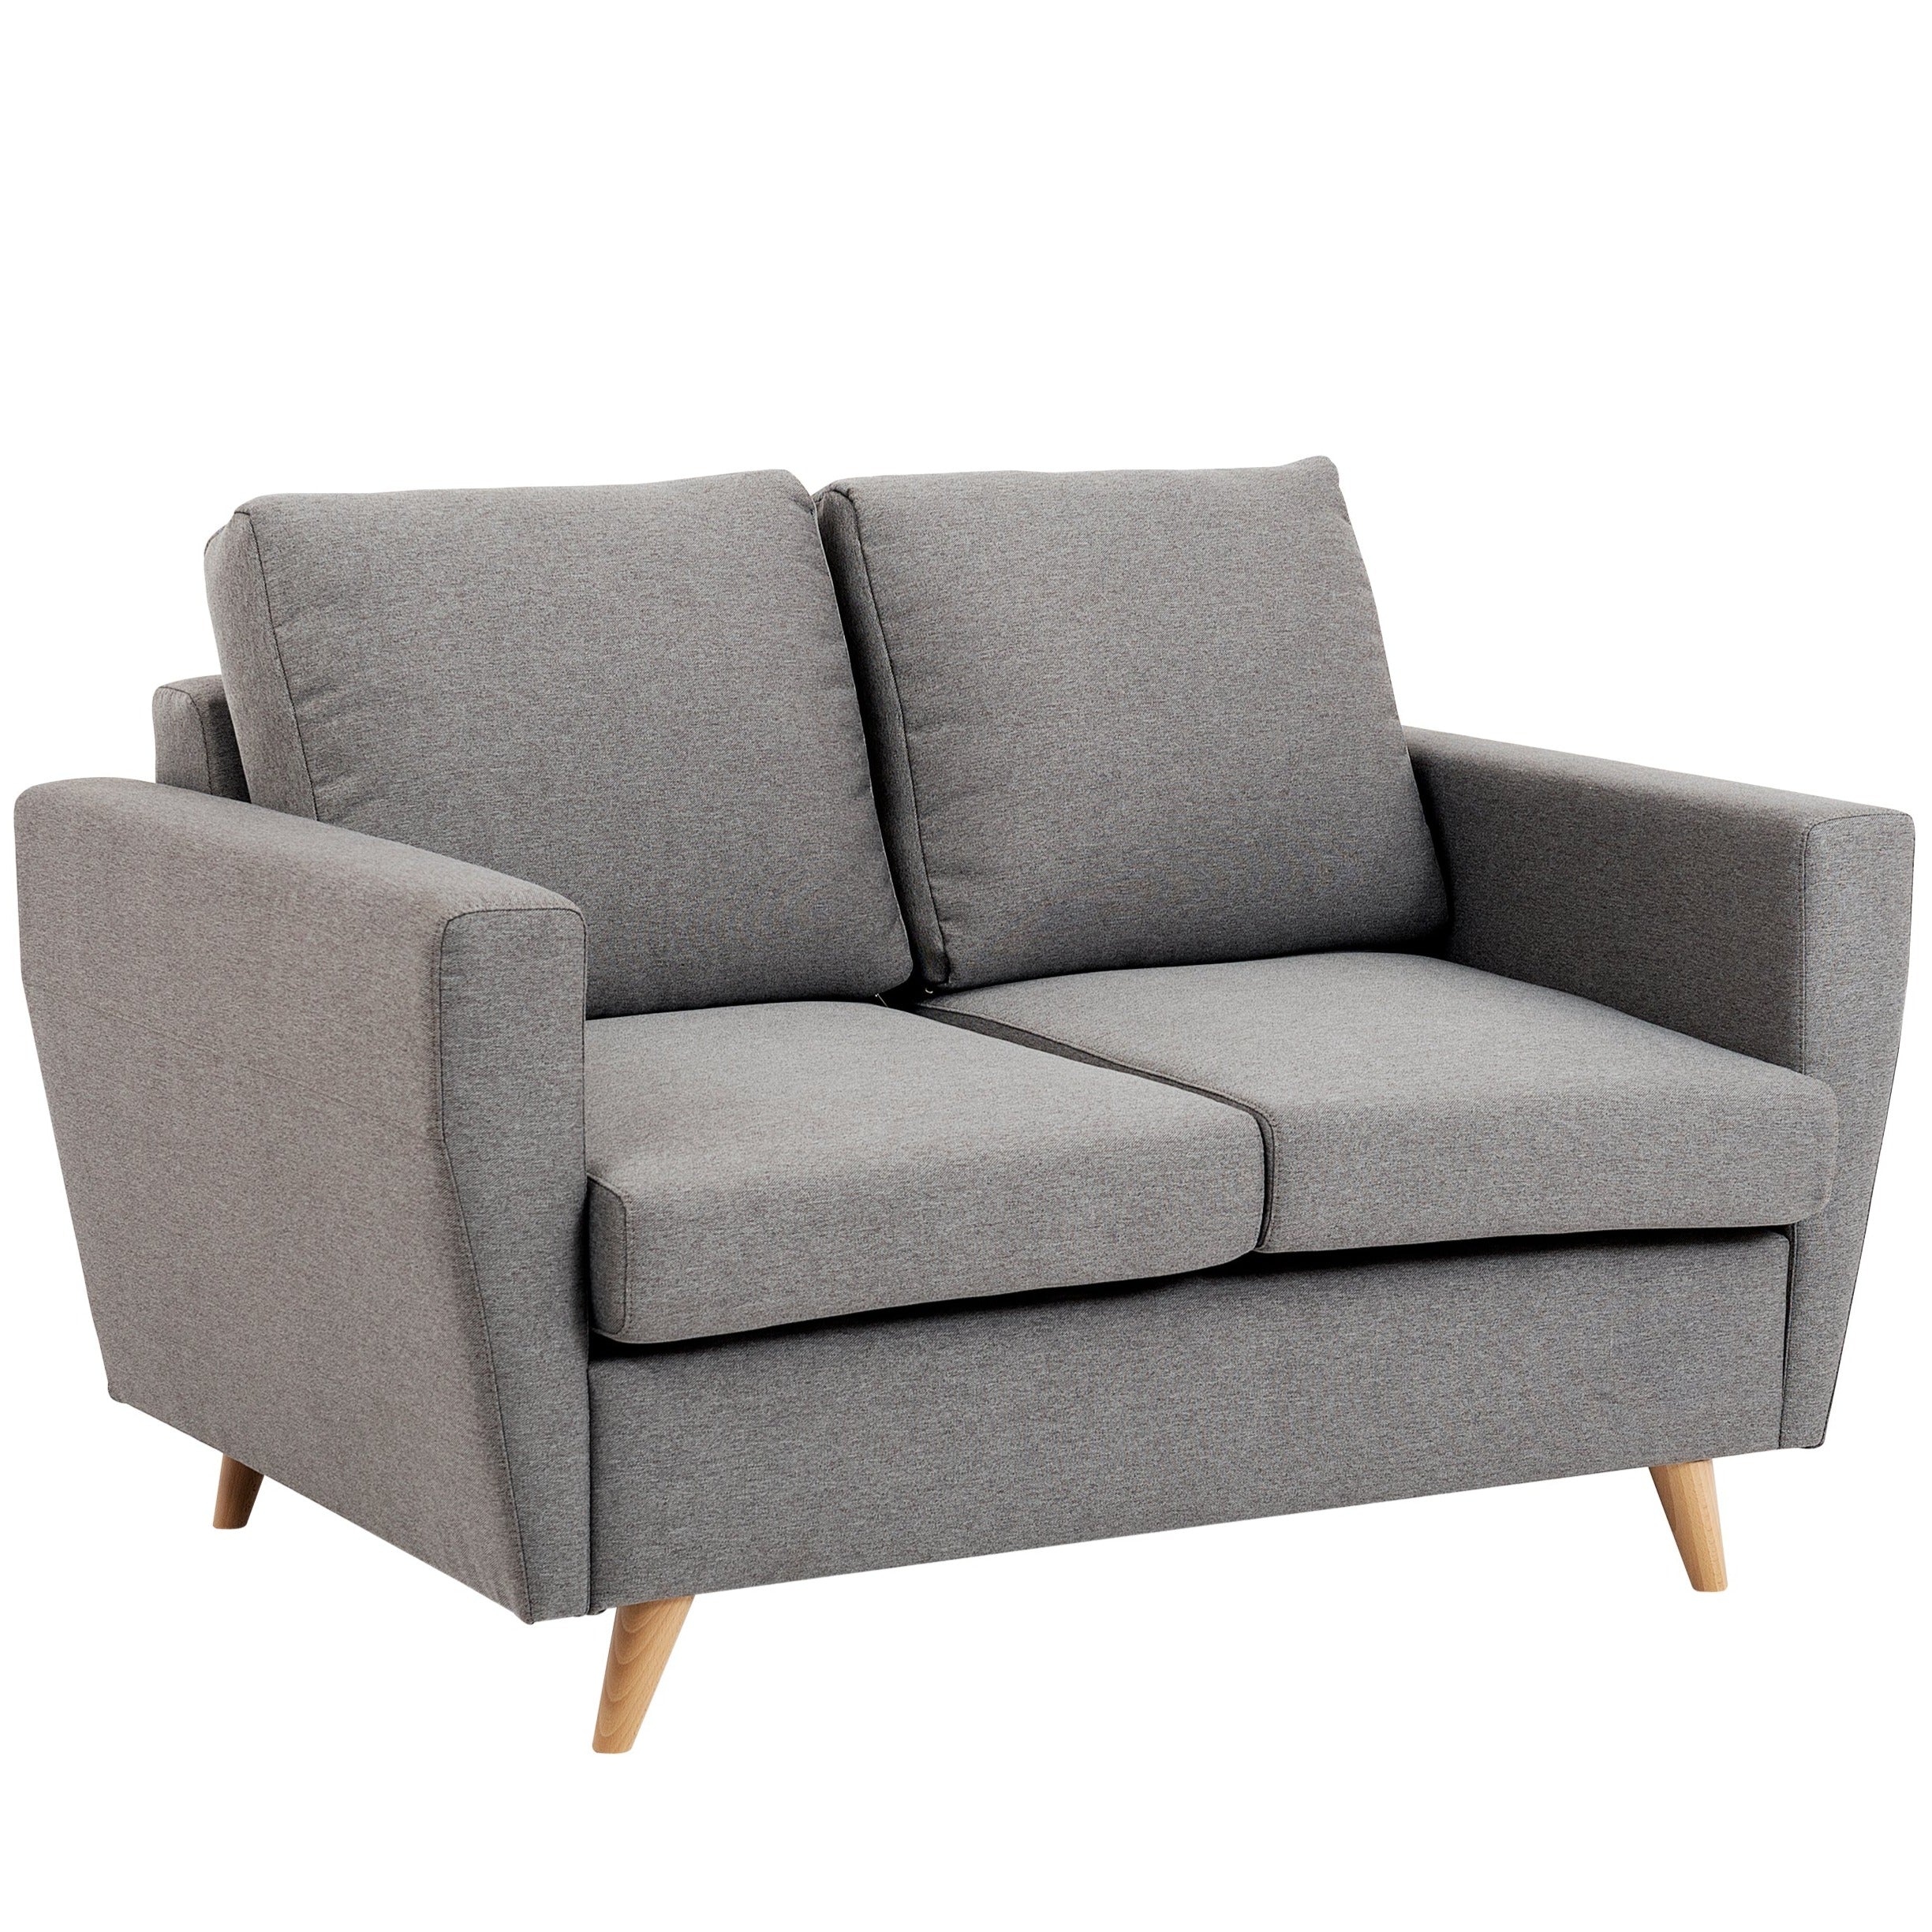 LOVER Sofa upholstery colour steel grey-2 seats